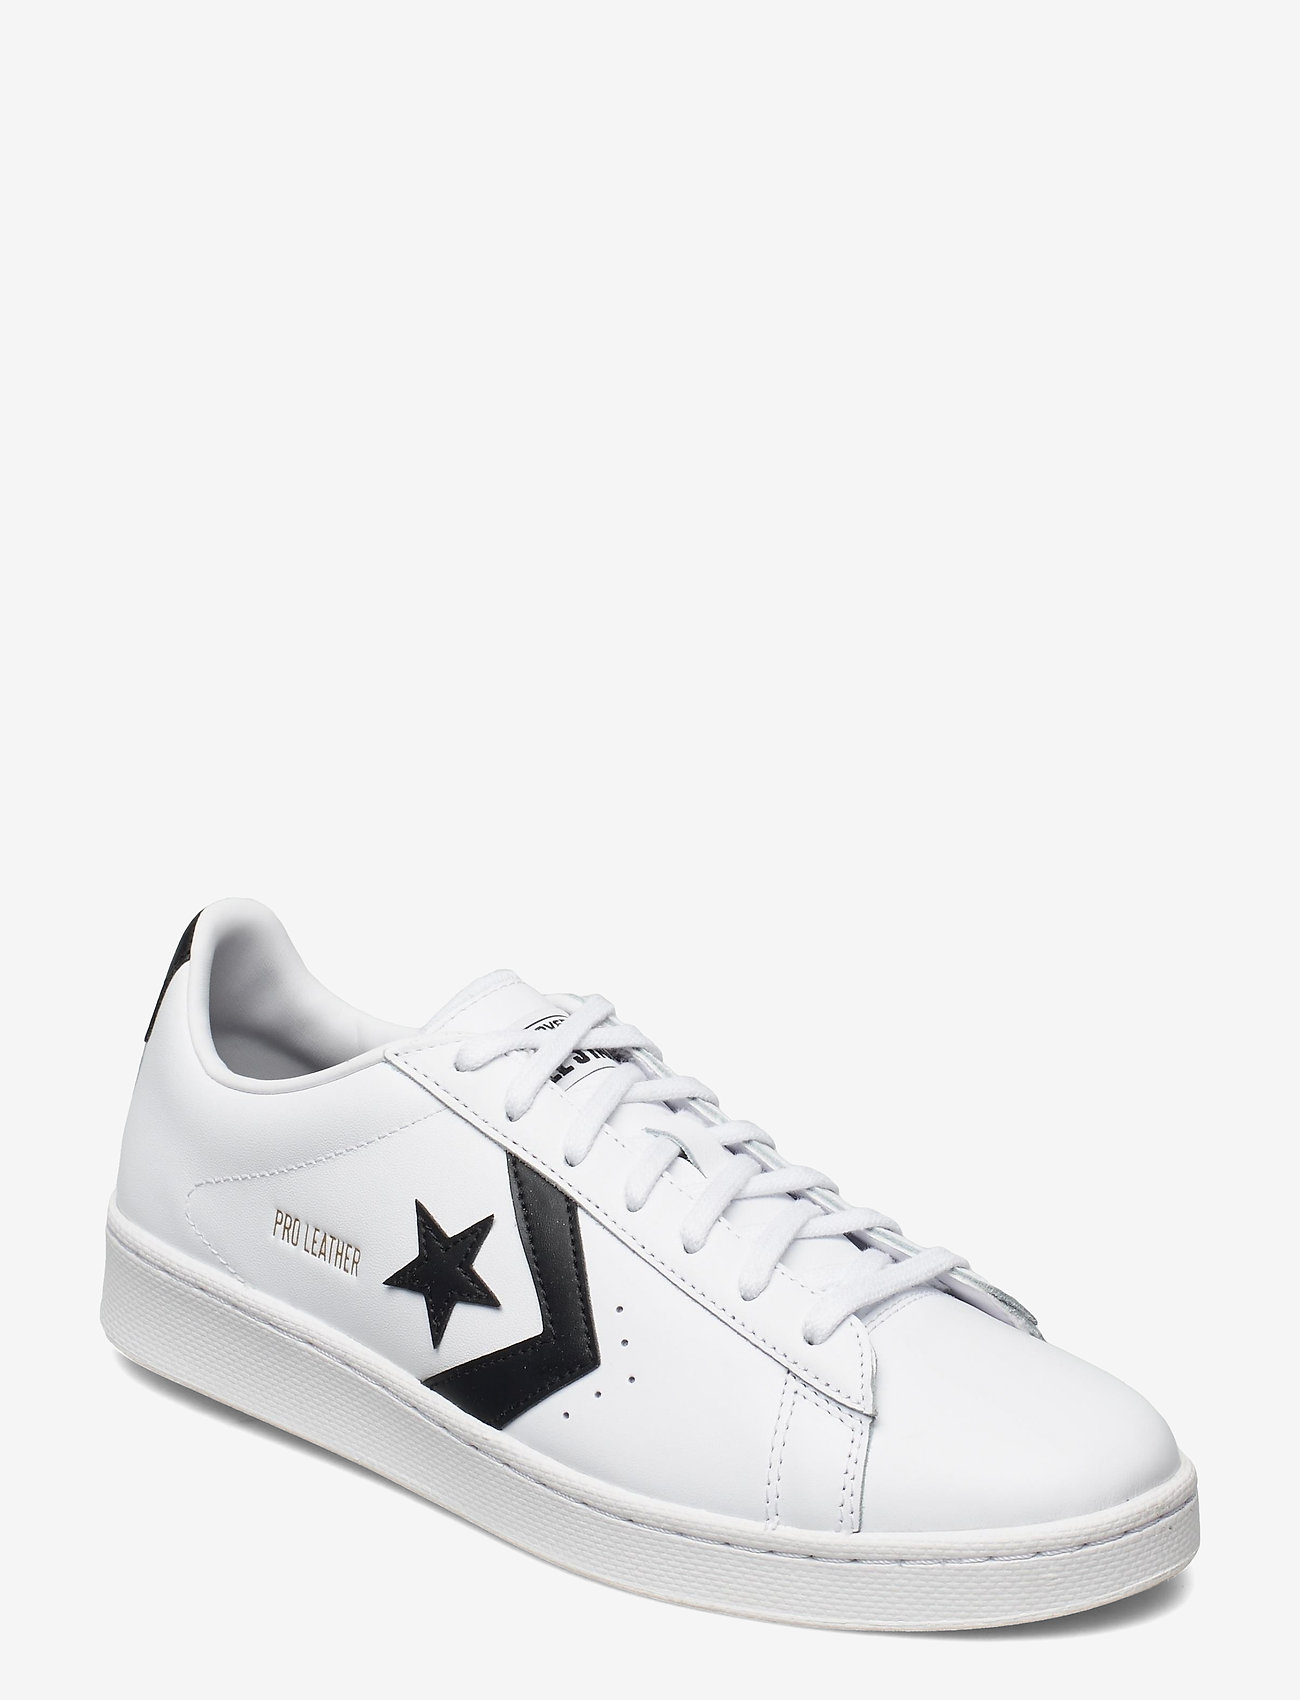 converse leather low top sneakers